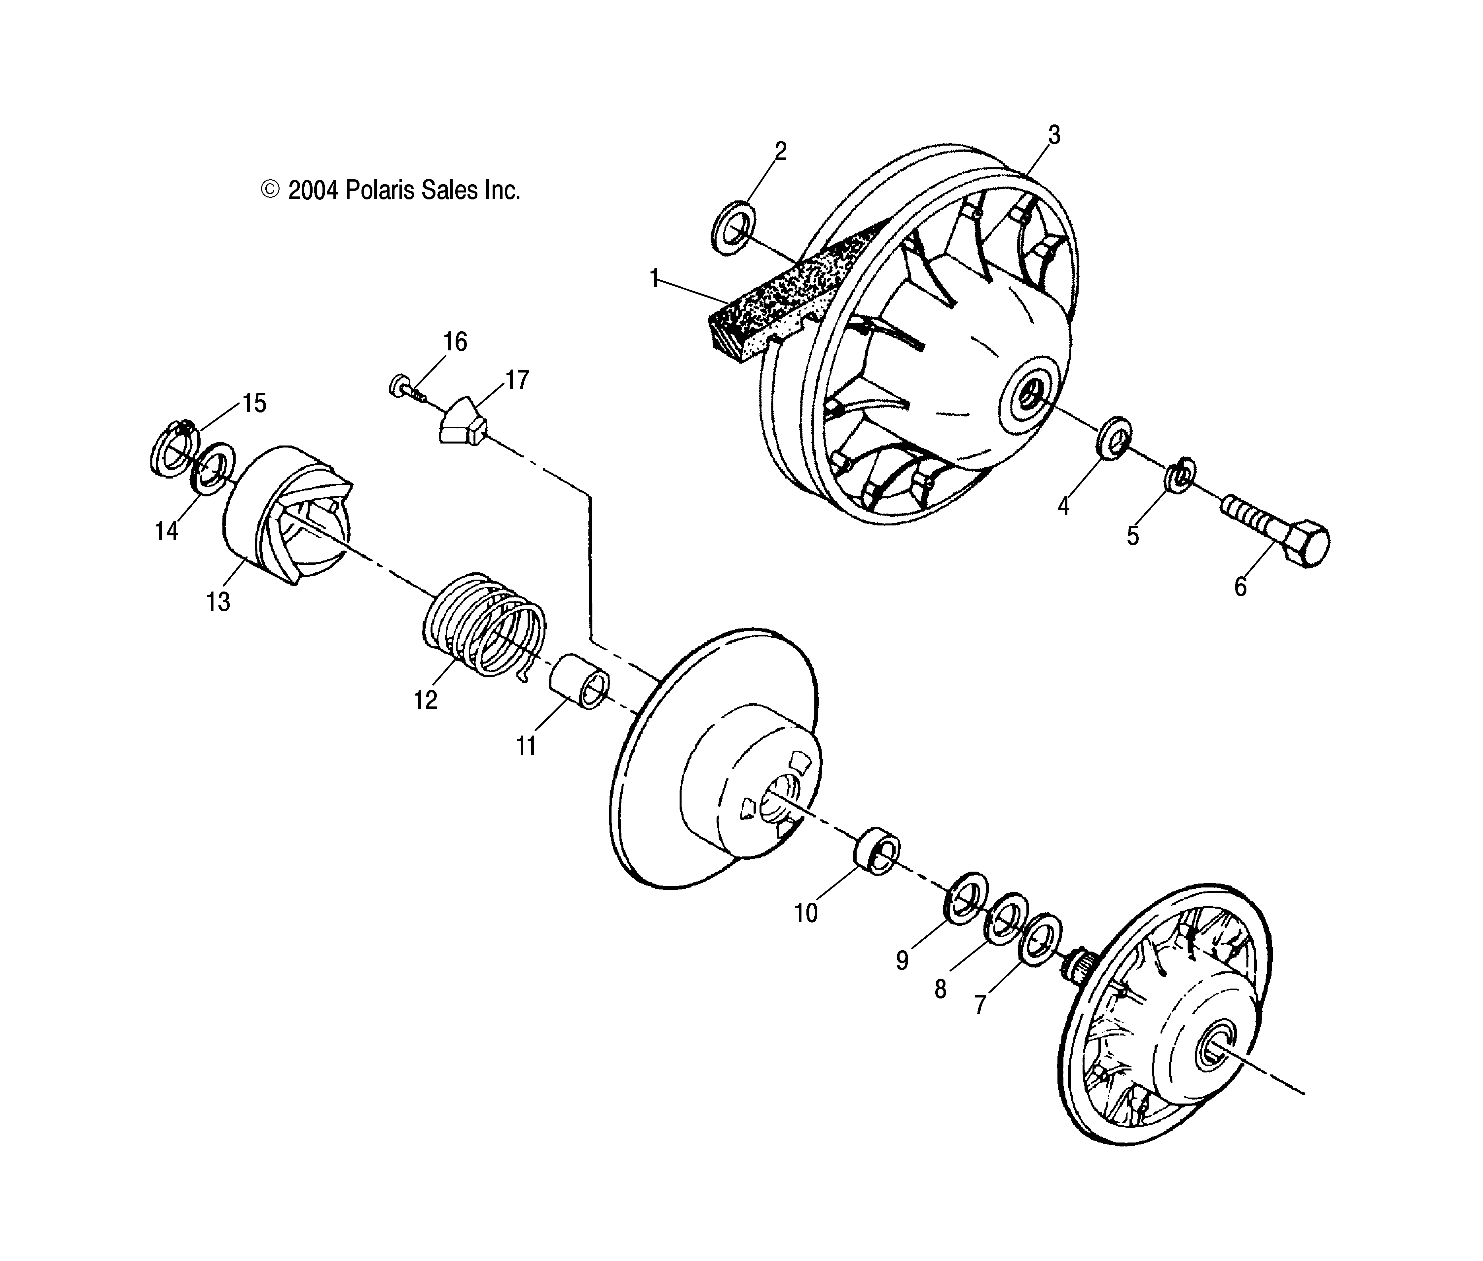 Part Number : 1322072 ASM-DRIVEN CLUTCH